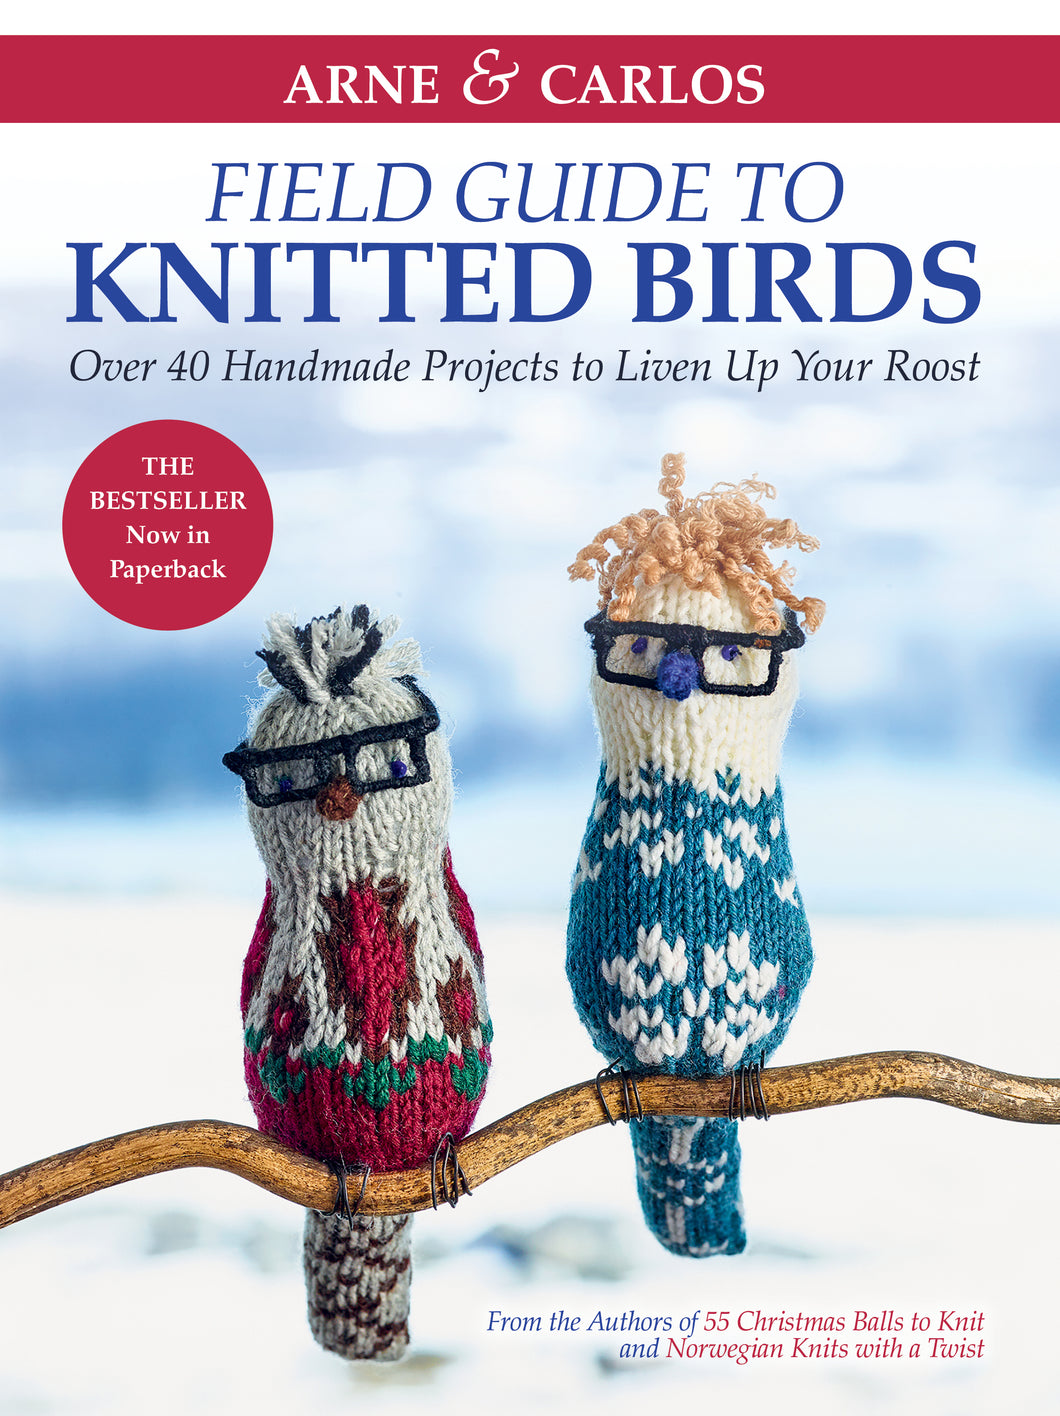 Arne & Carlos' Field Guide to Knitted Birds